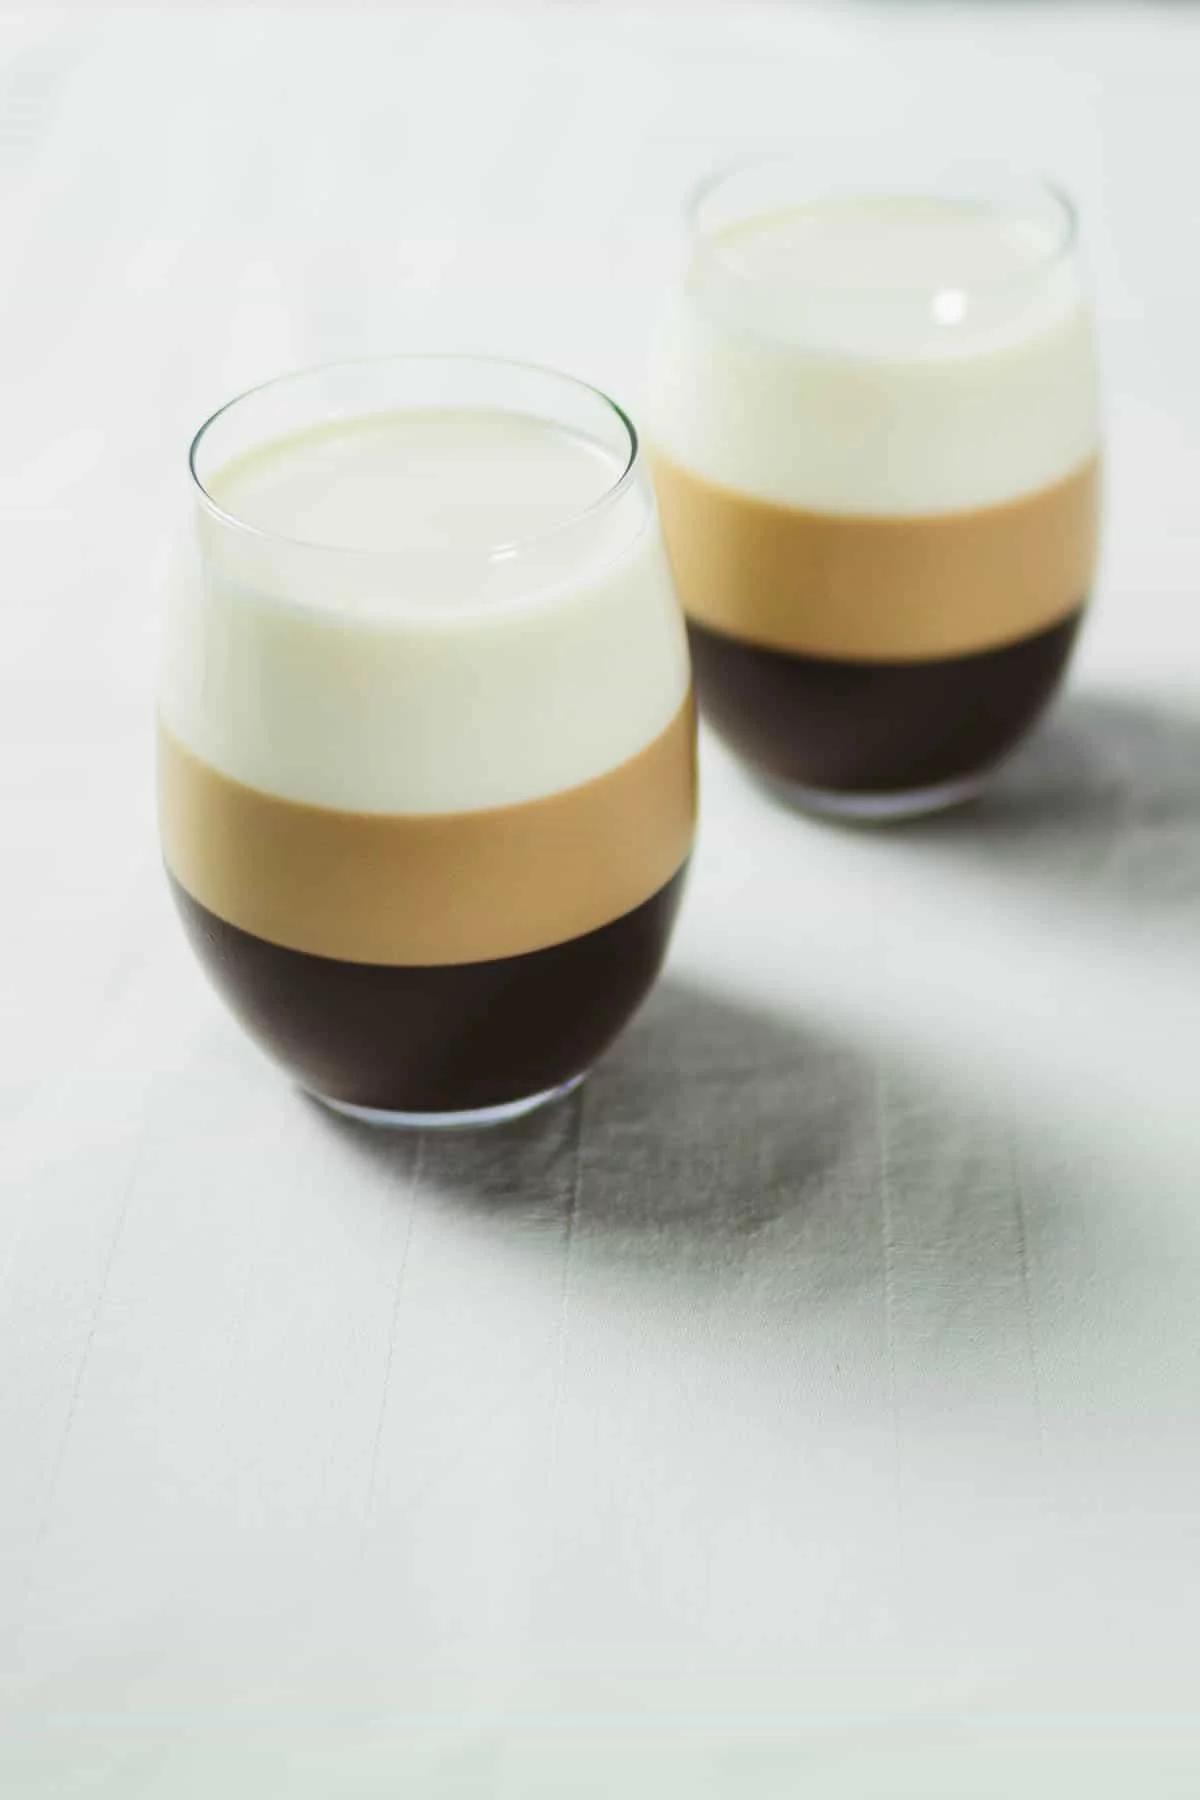 【Only 4 ingredients】Low Carb Coffee Jelly Recipe